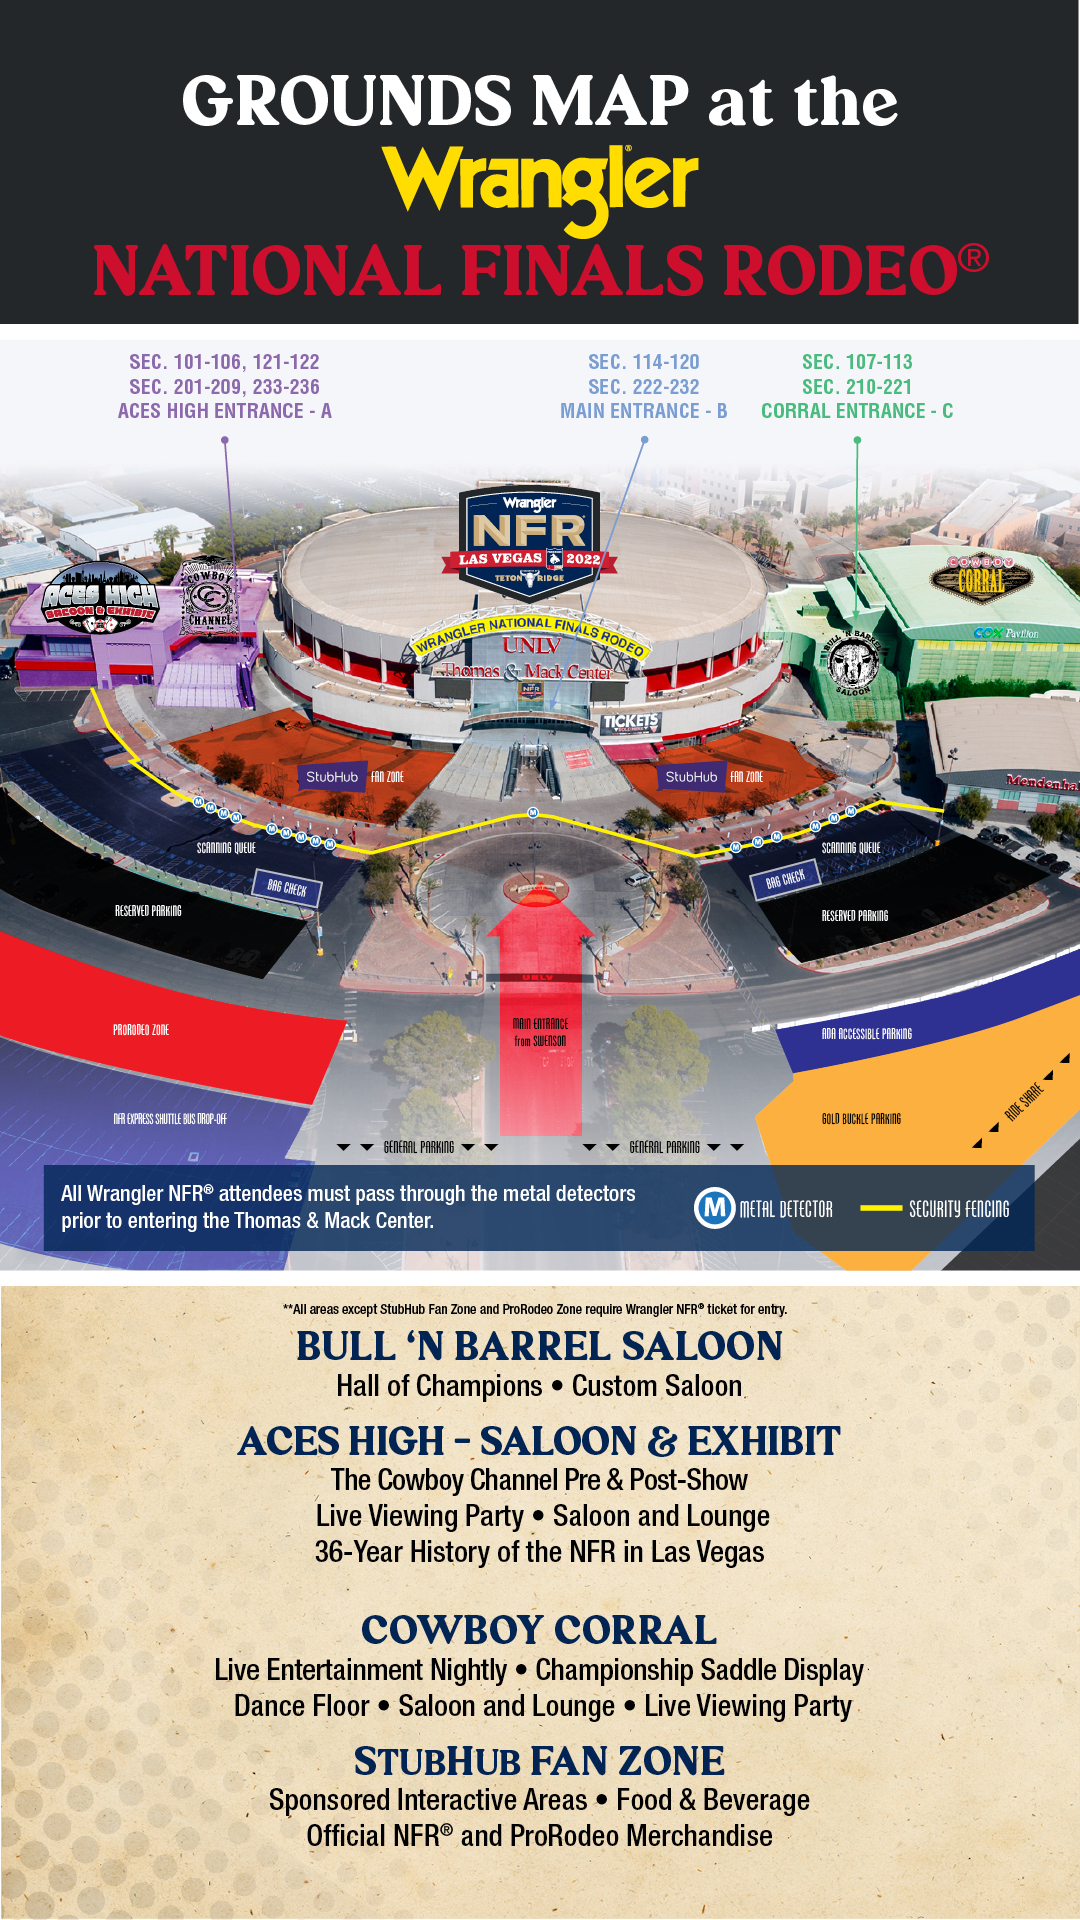 Thomas & Mack Center Grounds Map The Official NFR Experience